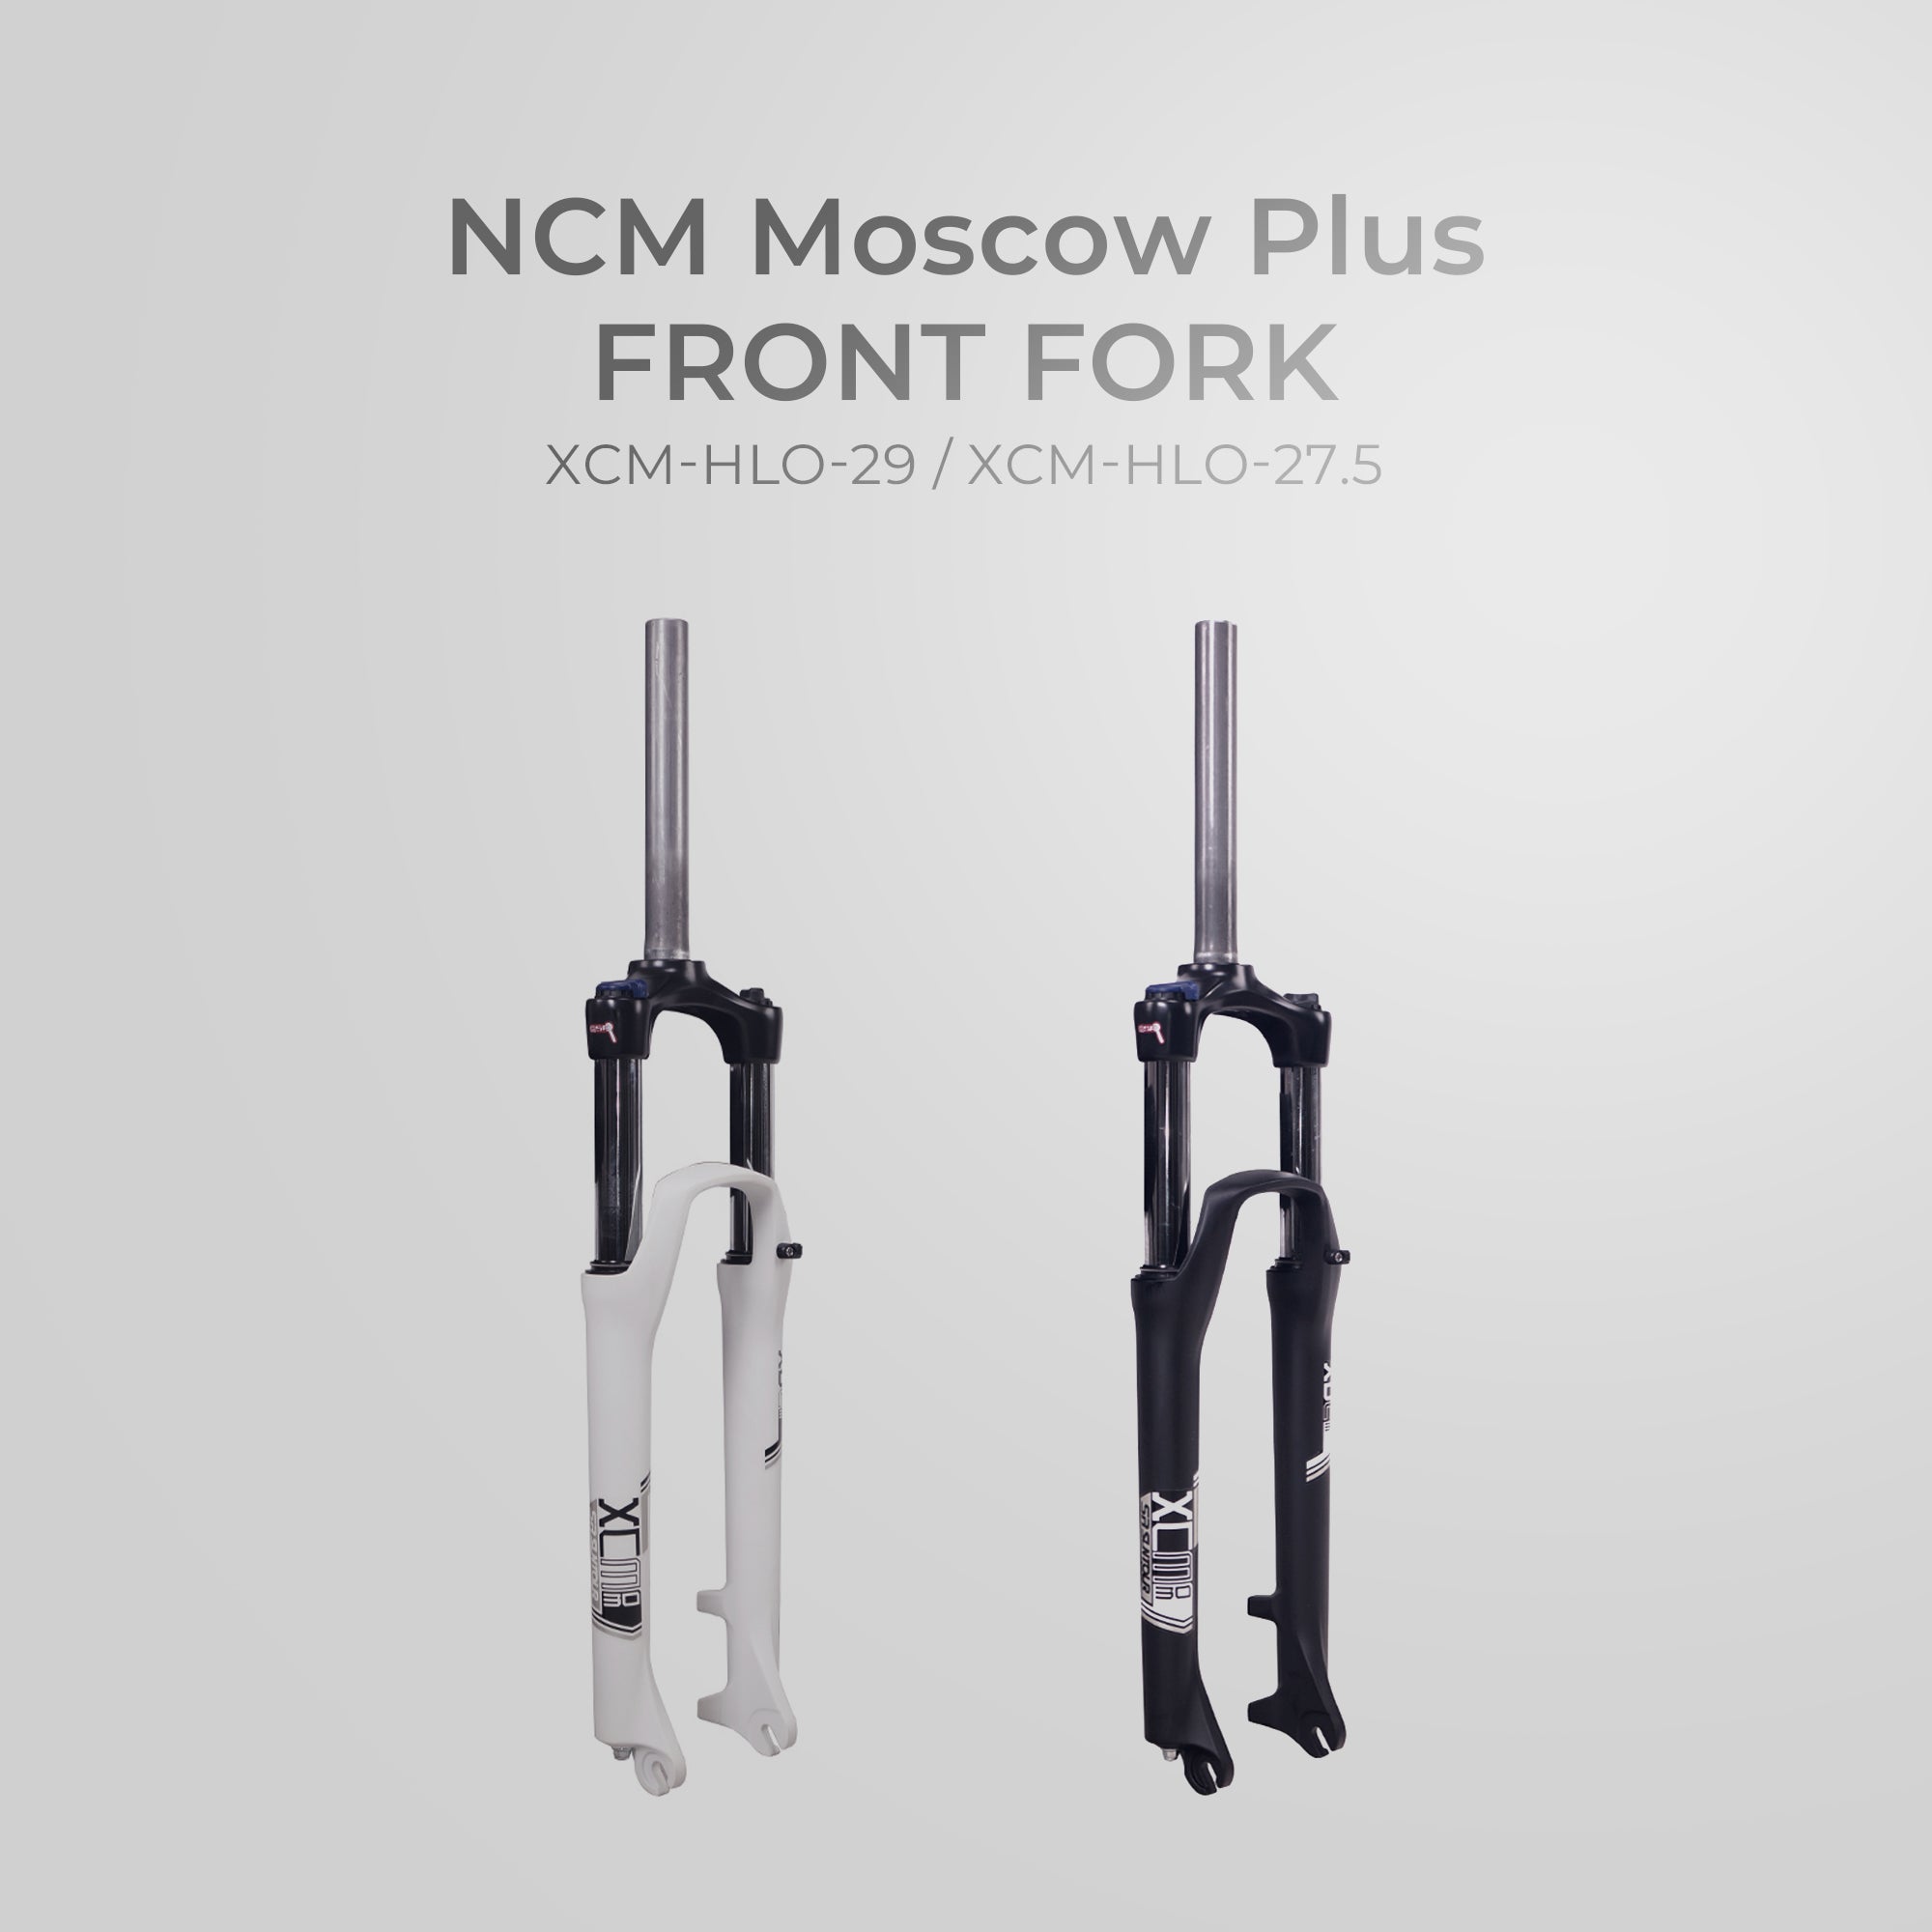 NCM Moscow Plus Front Fork - XCM-HLO-29/27.5